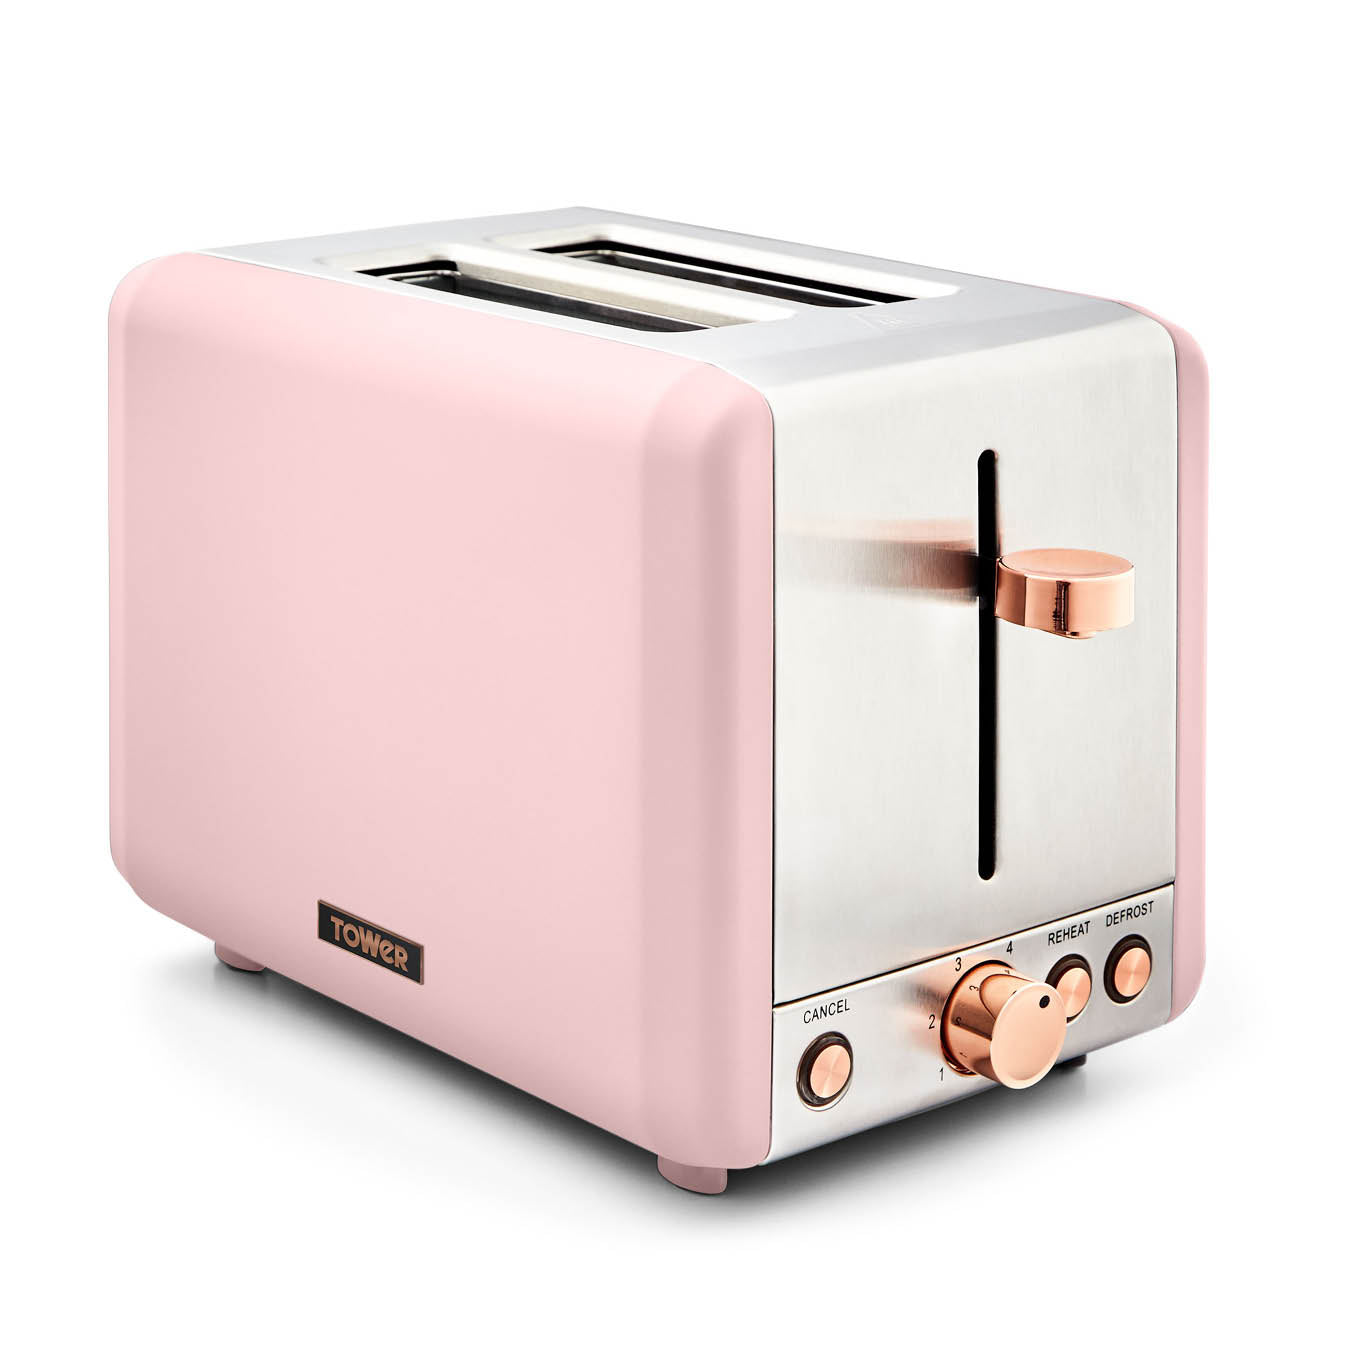 Tower Cavaletto 2 Slice Stainless Steel Toaster - Pink  | TJ Hughes